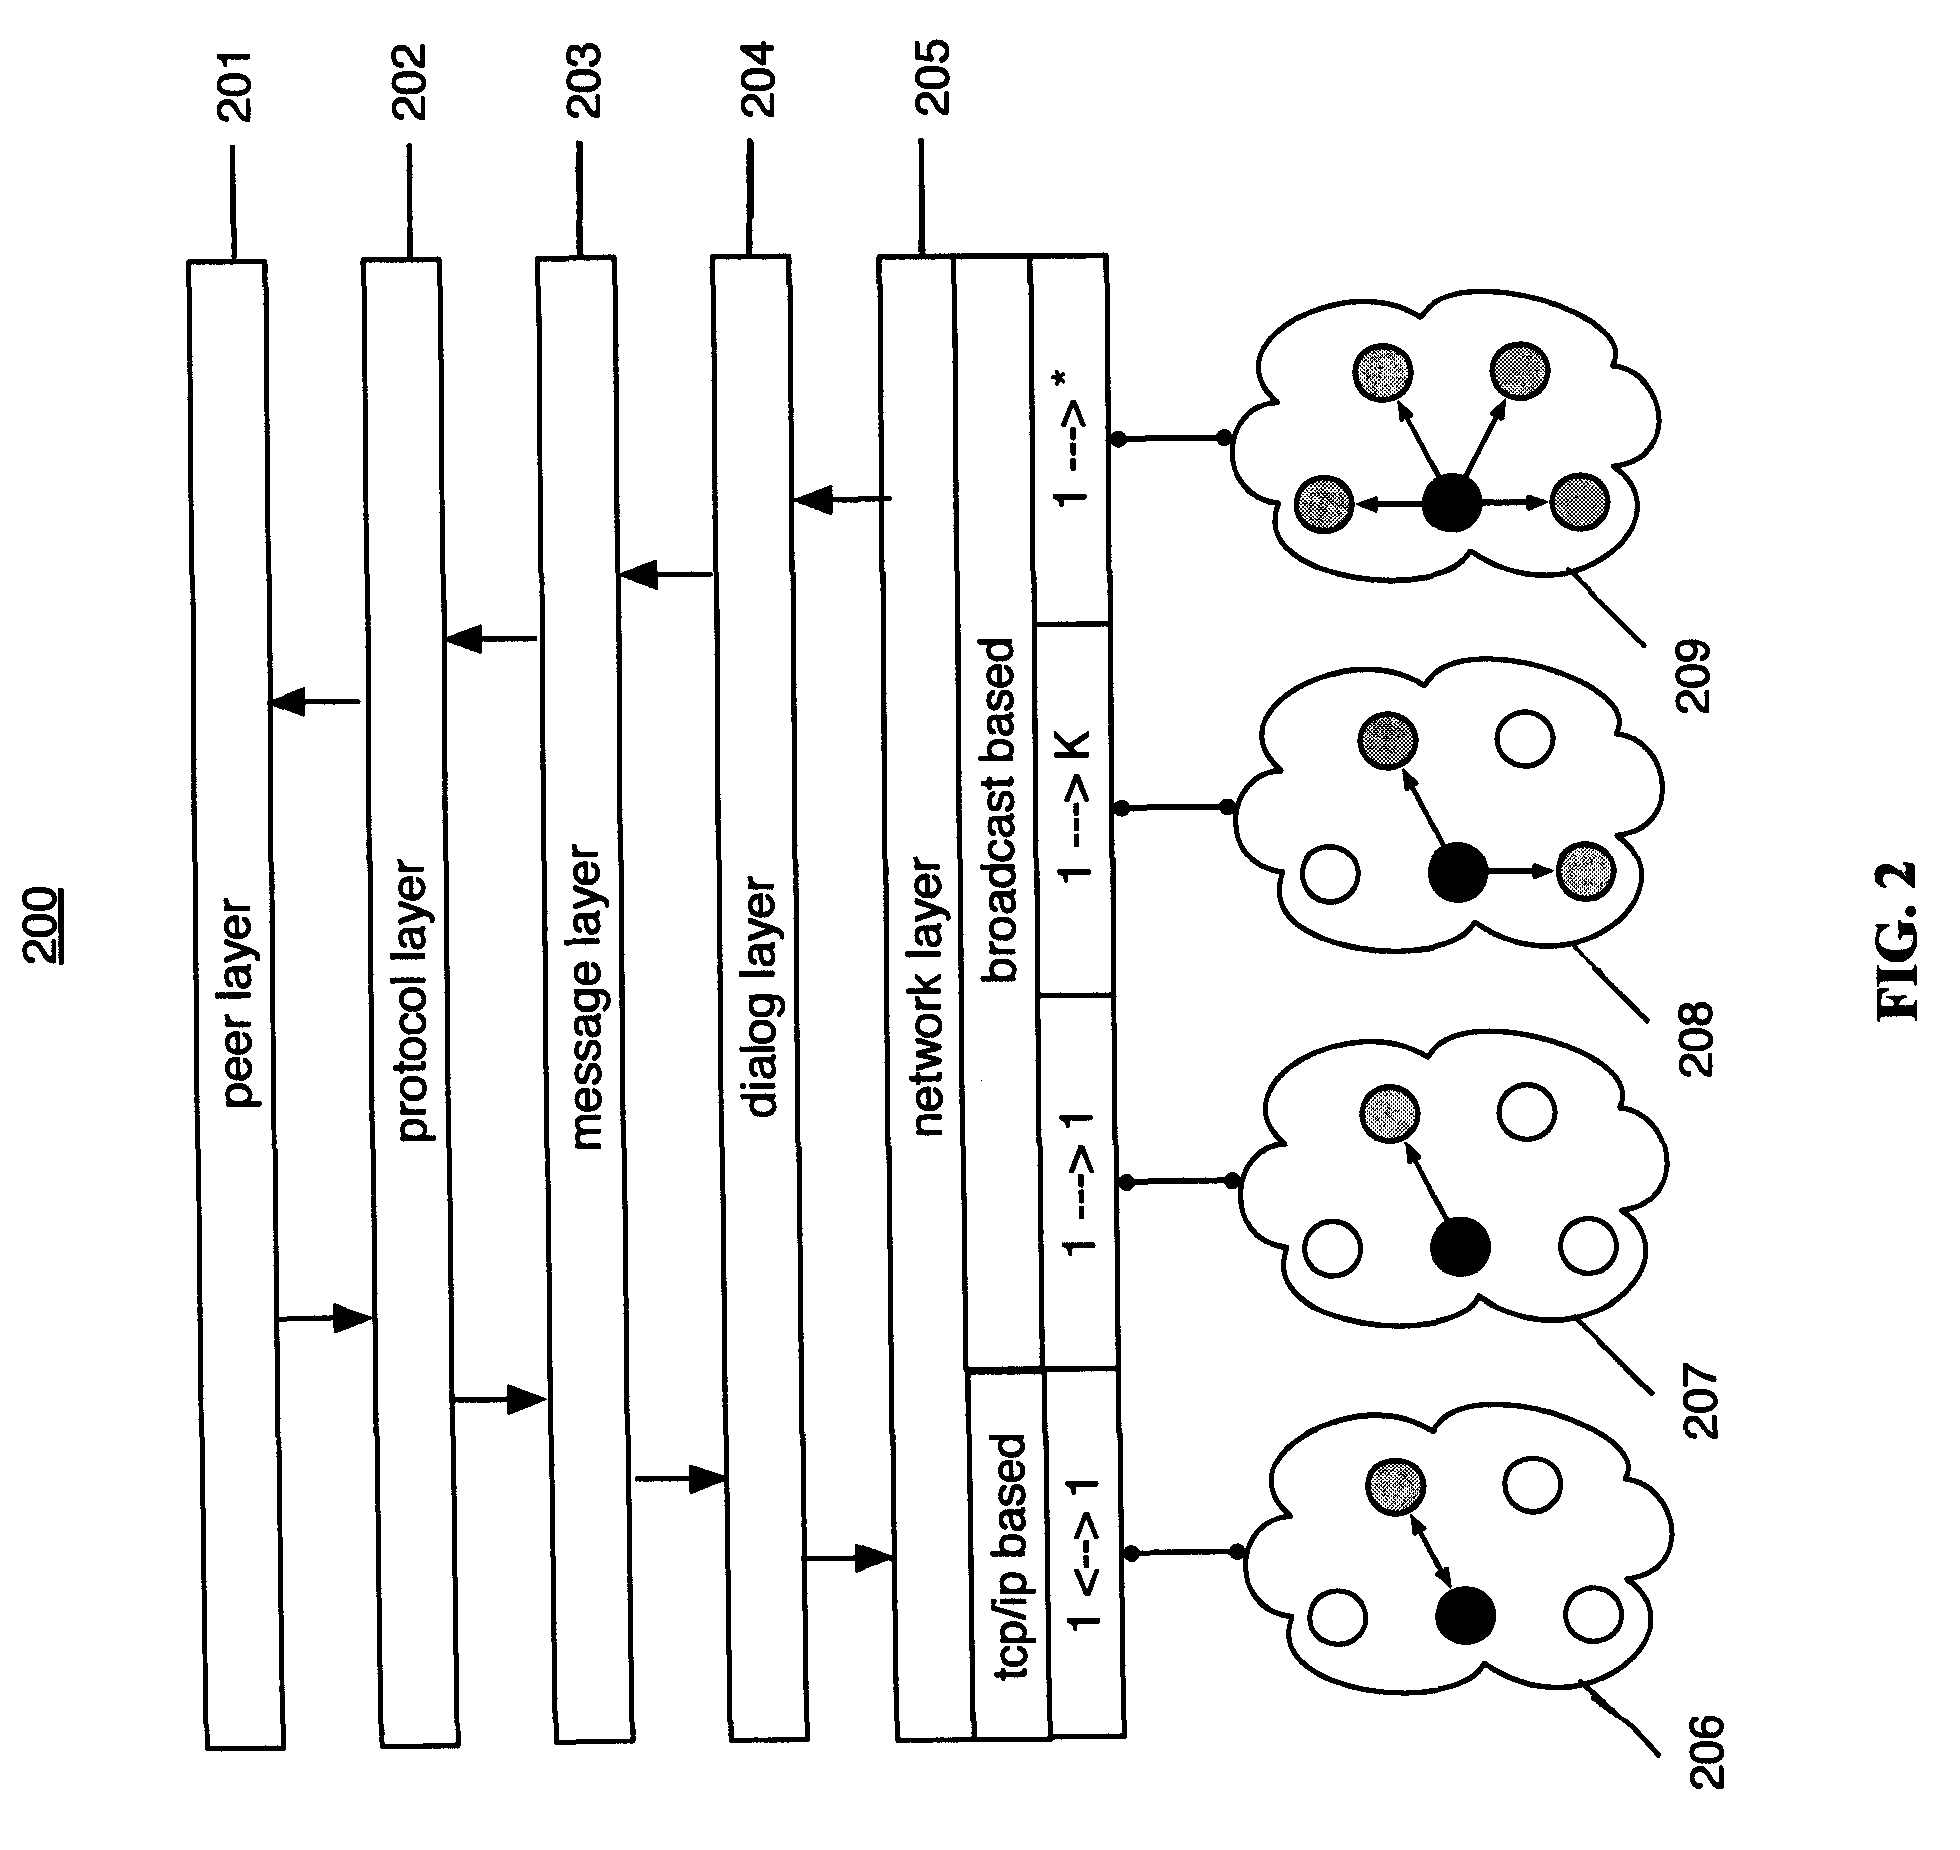 Method and apparatus for utility computing in ad-hoc and configured peer-to-peer networks